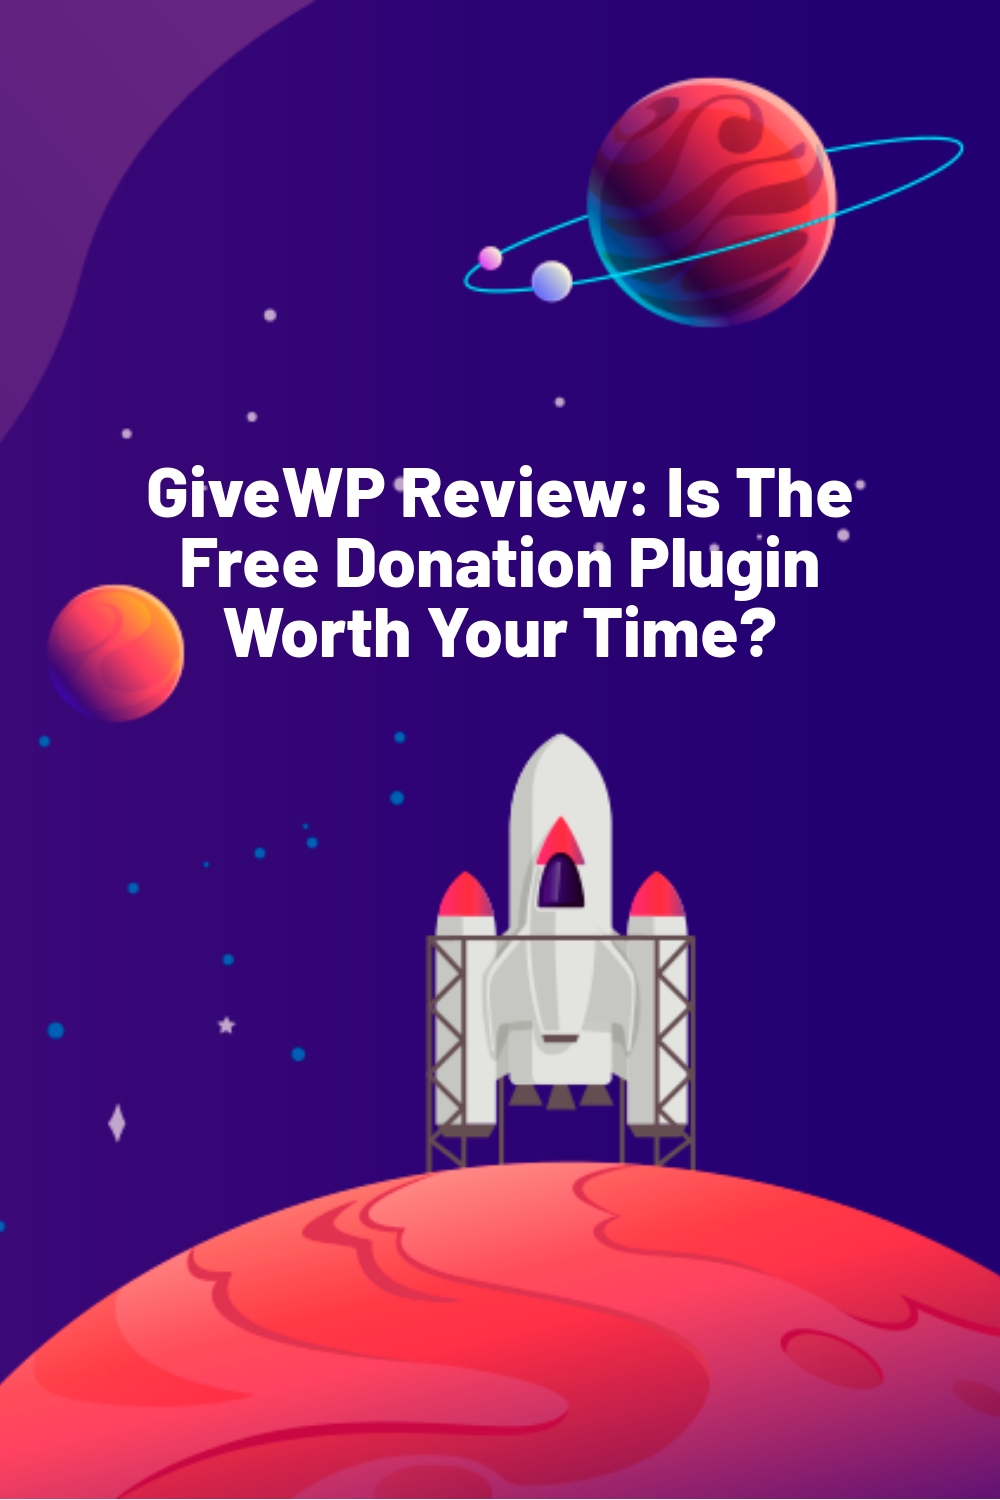 GiveWP Review: Is The Free Donation Plugin Worth Your Time?